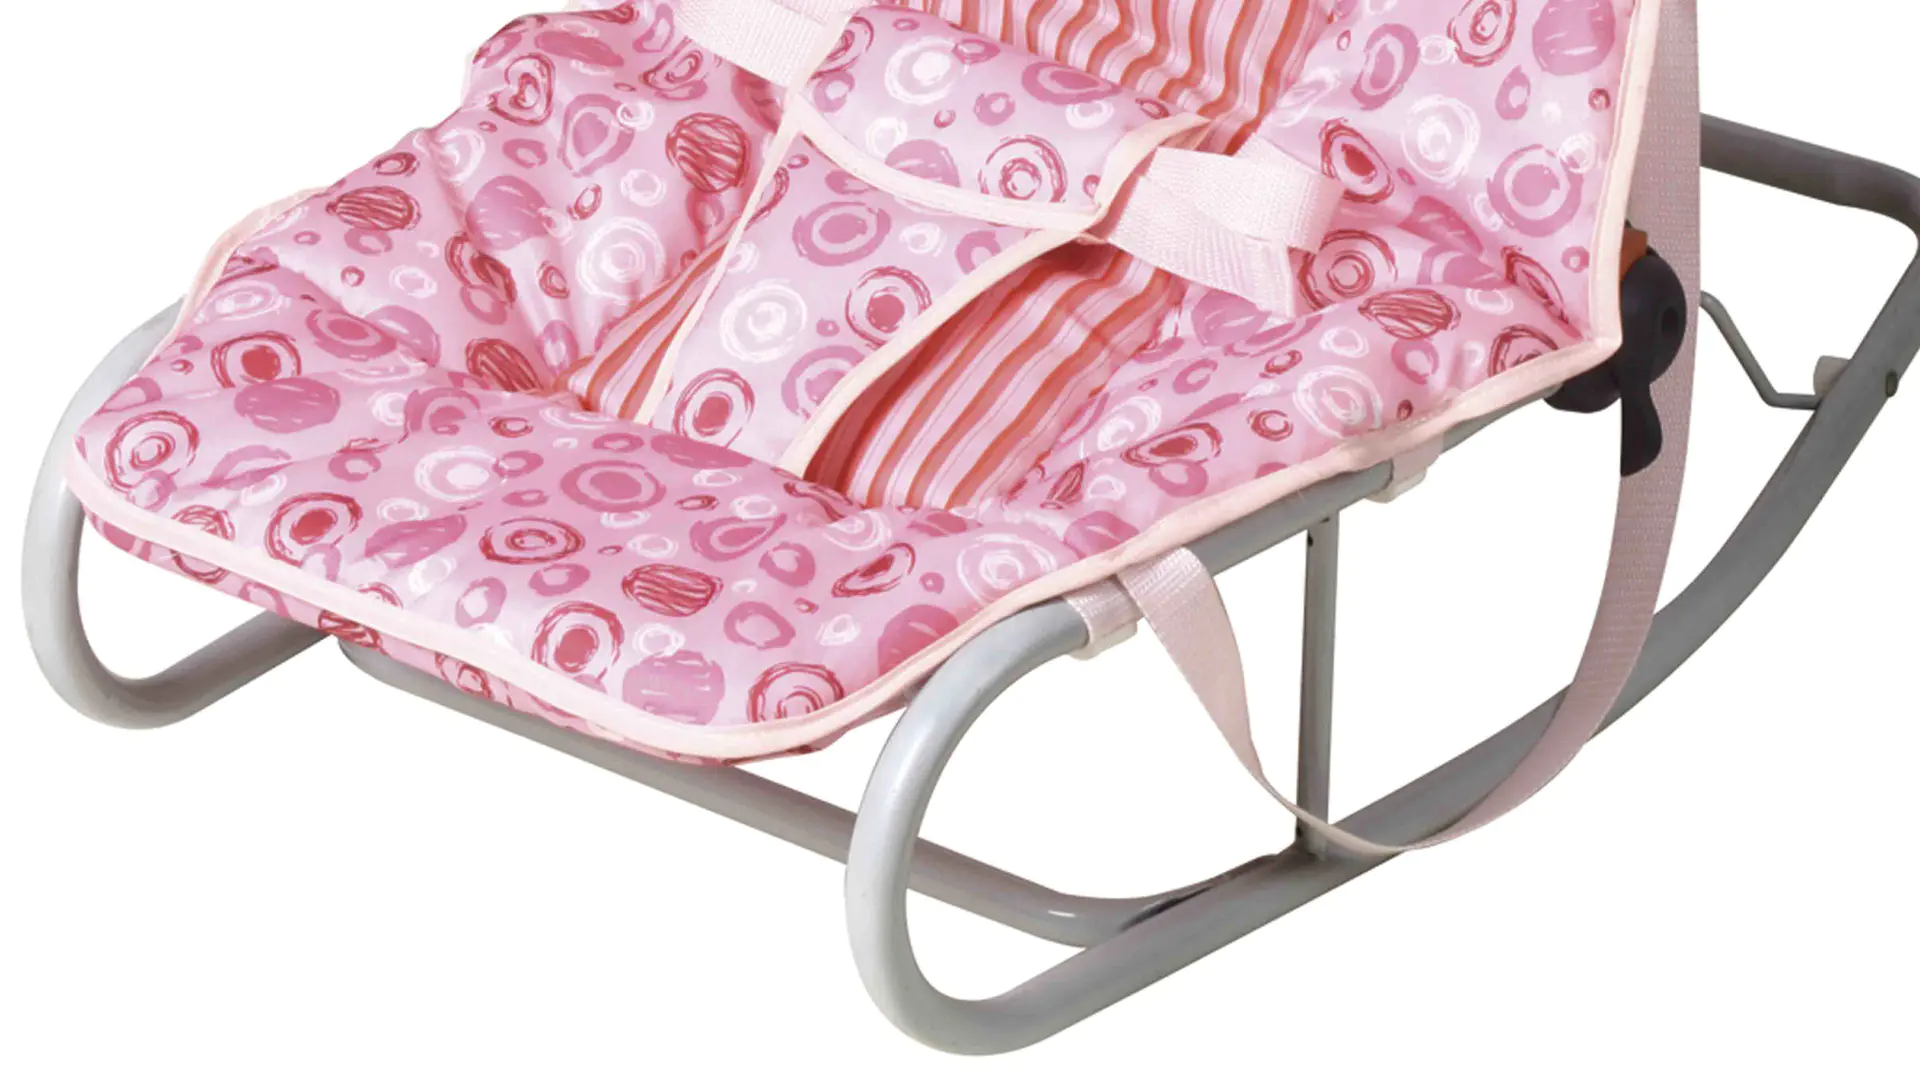 professional baby rocky chair supplier for bedroom